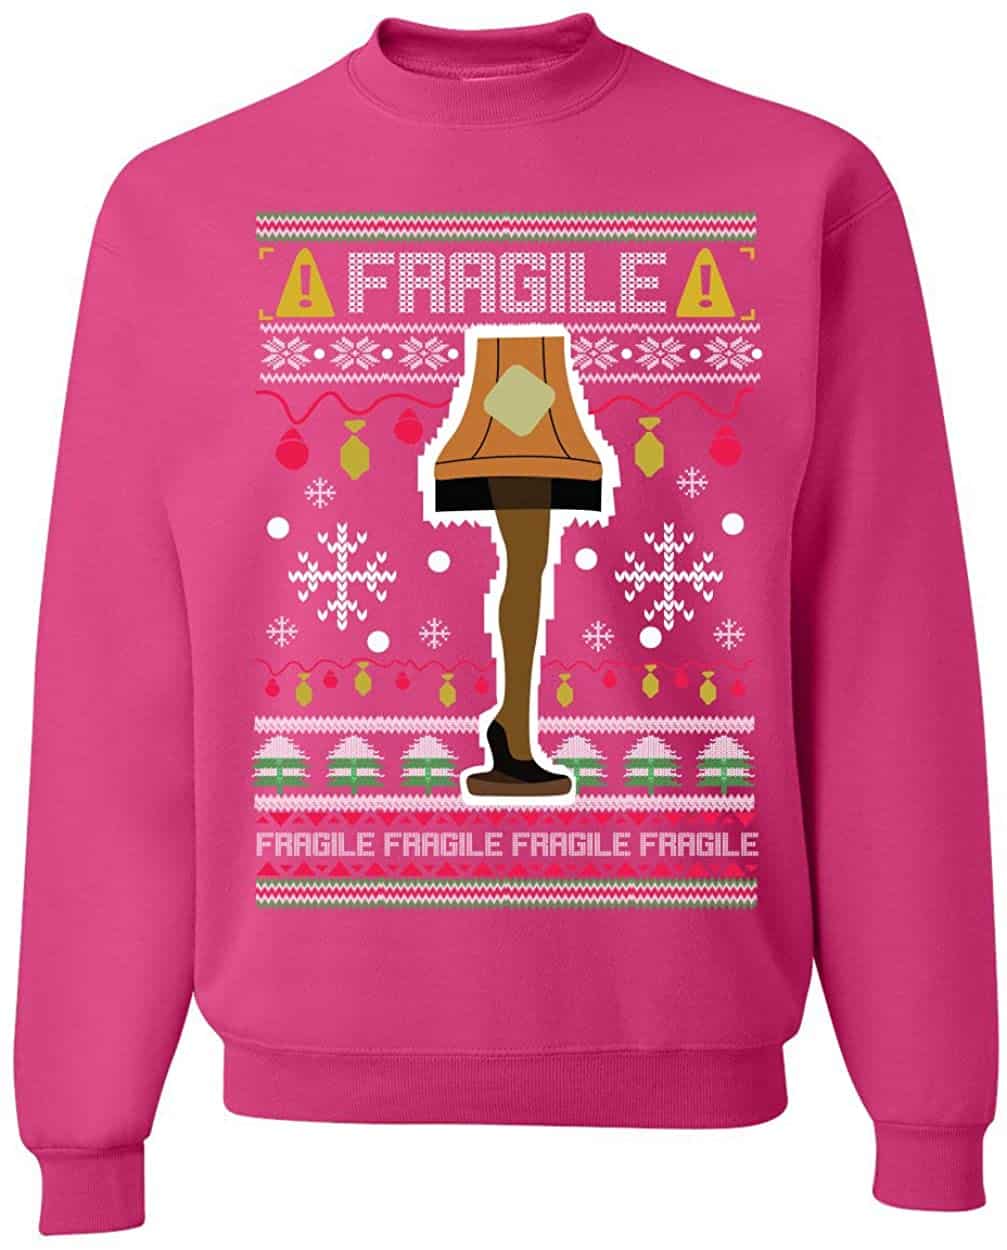 Plus Size Ugly Sweater 02